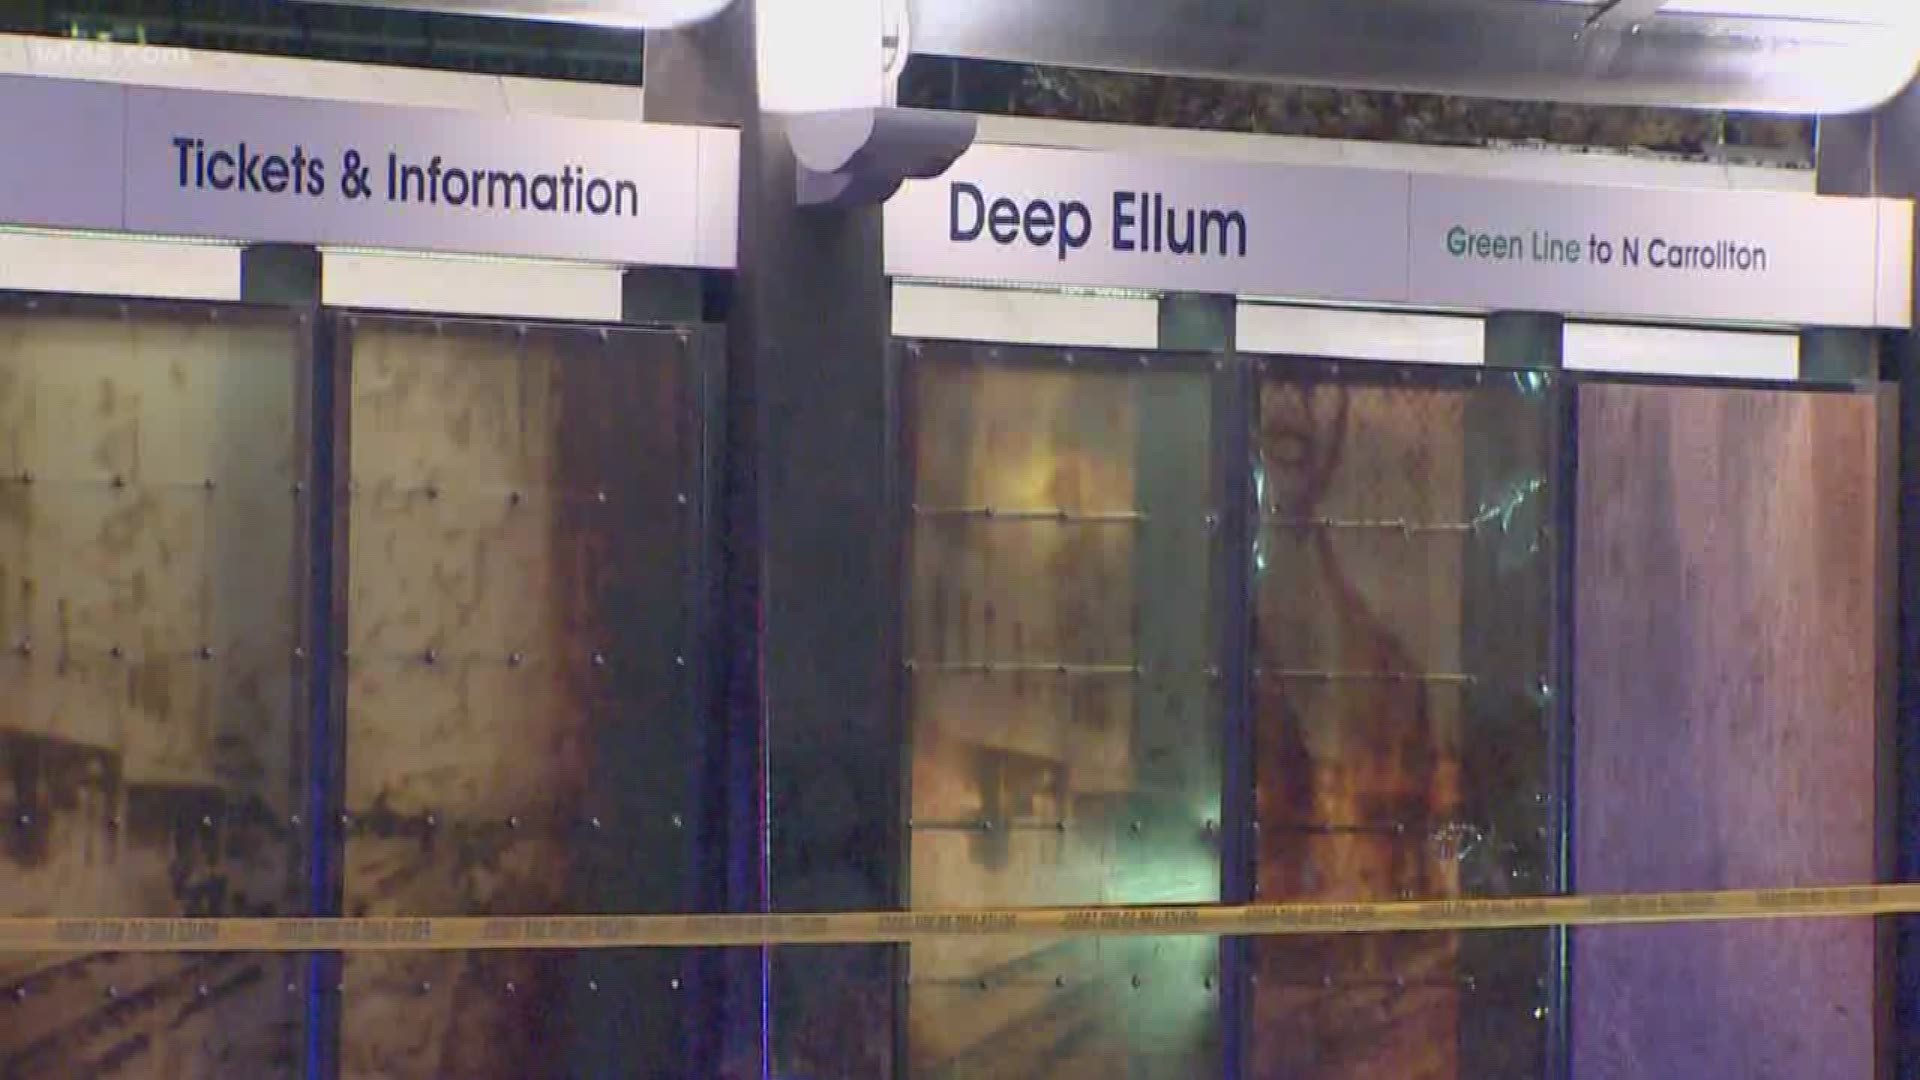 A man was shot and killed at the Deep Ellum DART station early Monday morning, DART police told WFAA. The suspect is still outstanding.